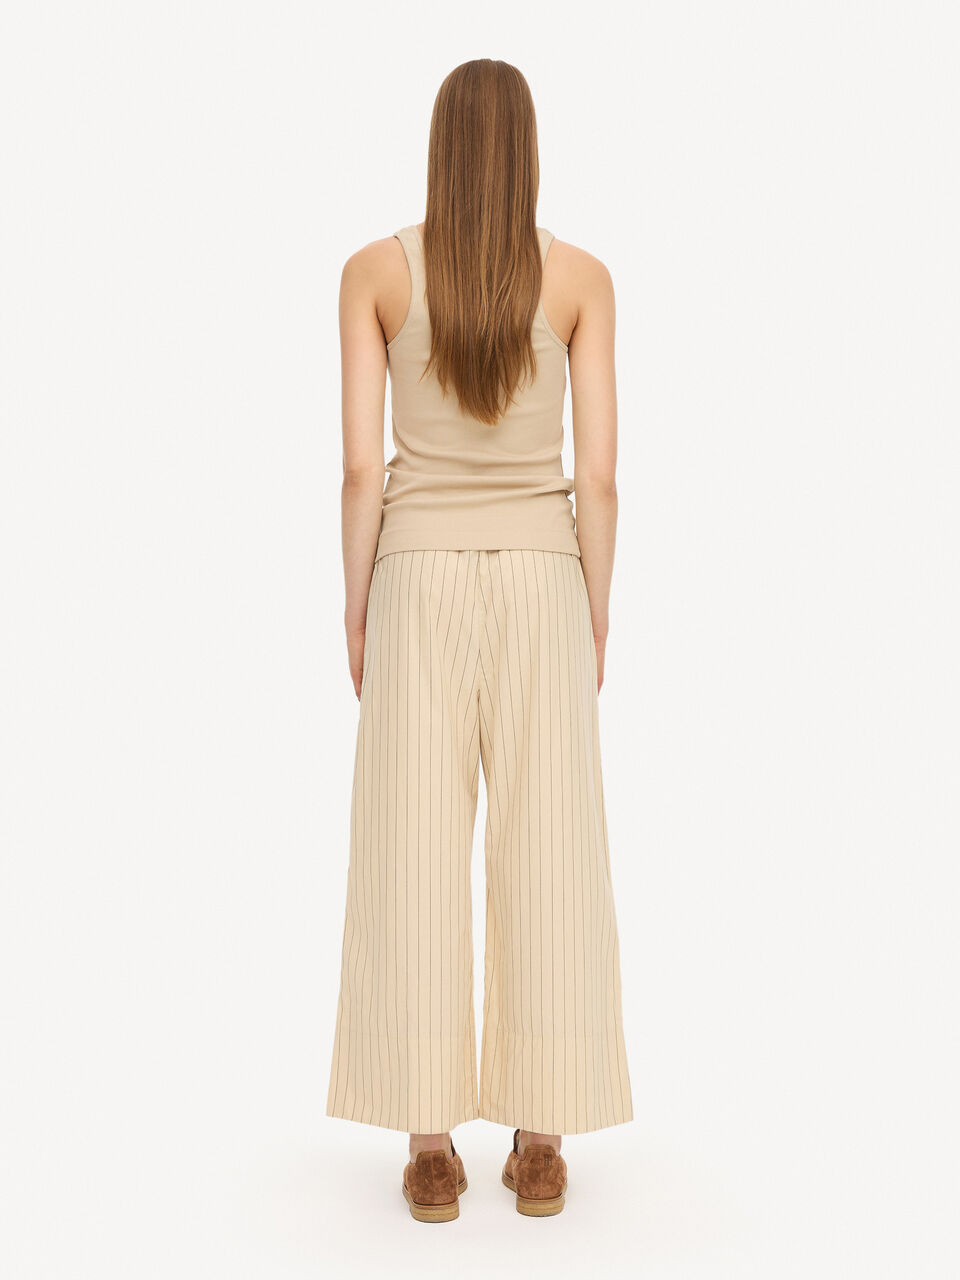 Luisa high-waisted trousers: Pinstripe